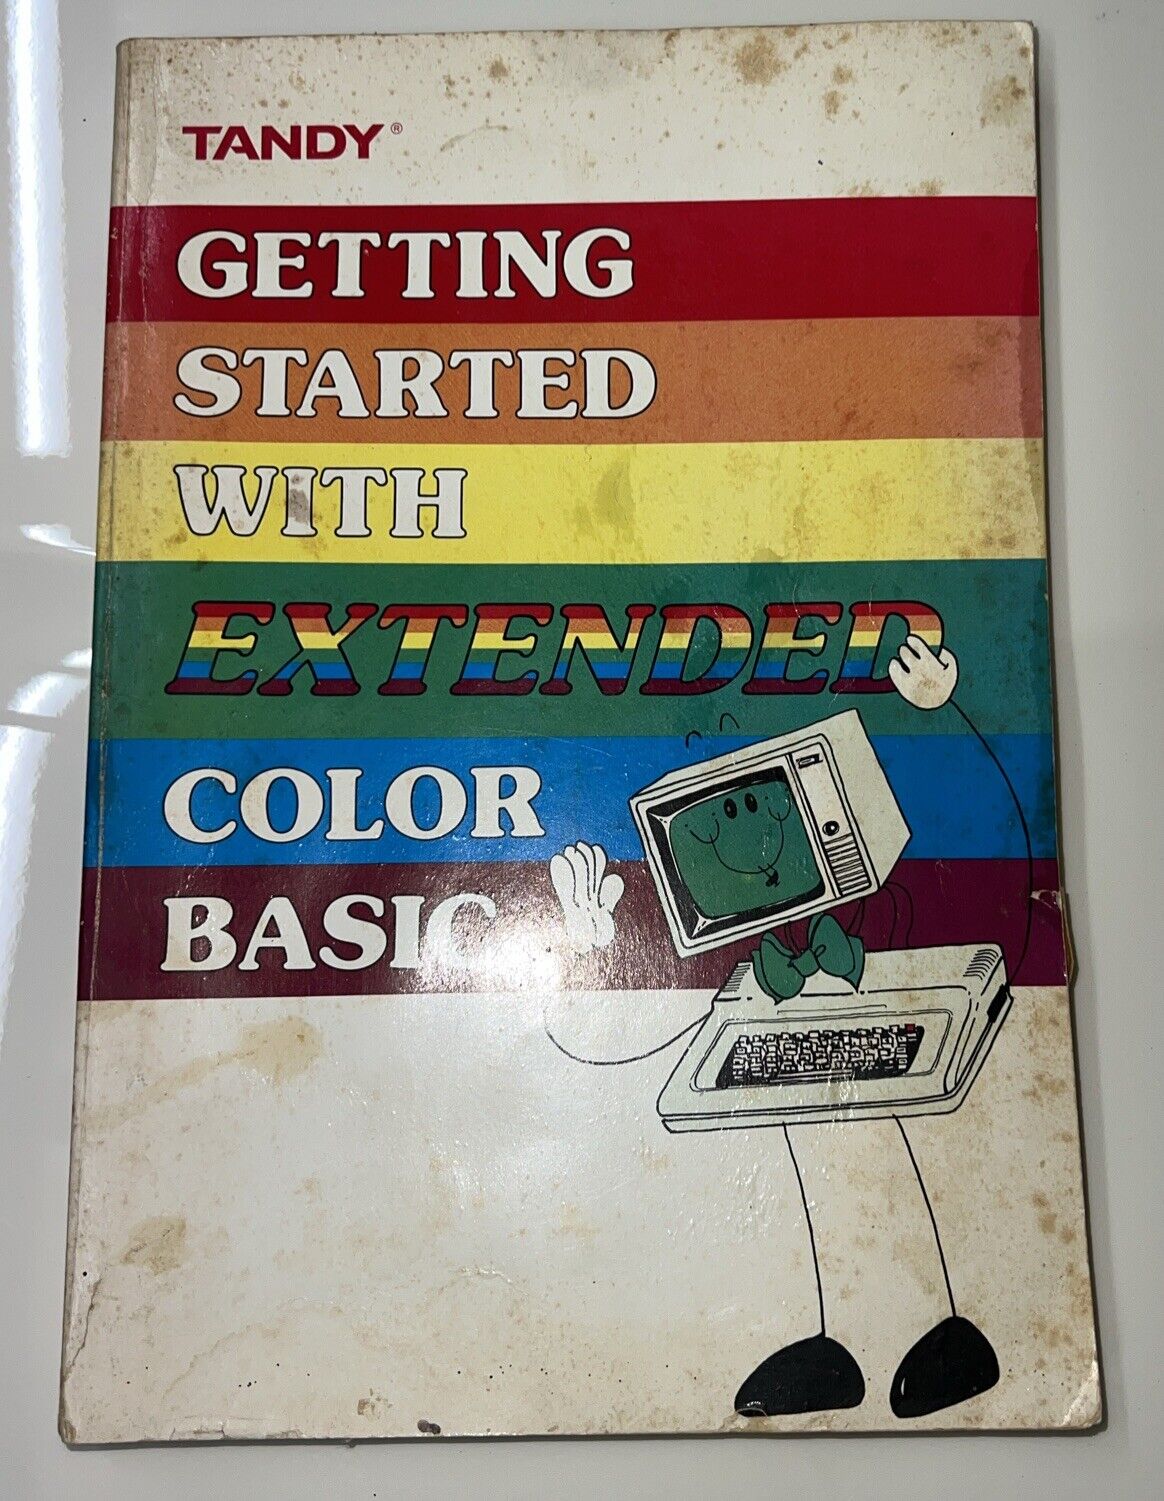 Getting Started with Extended Color Basic  TRS-80 Tandy Radio Shack 1984